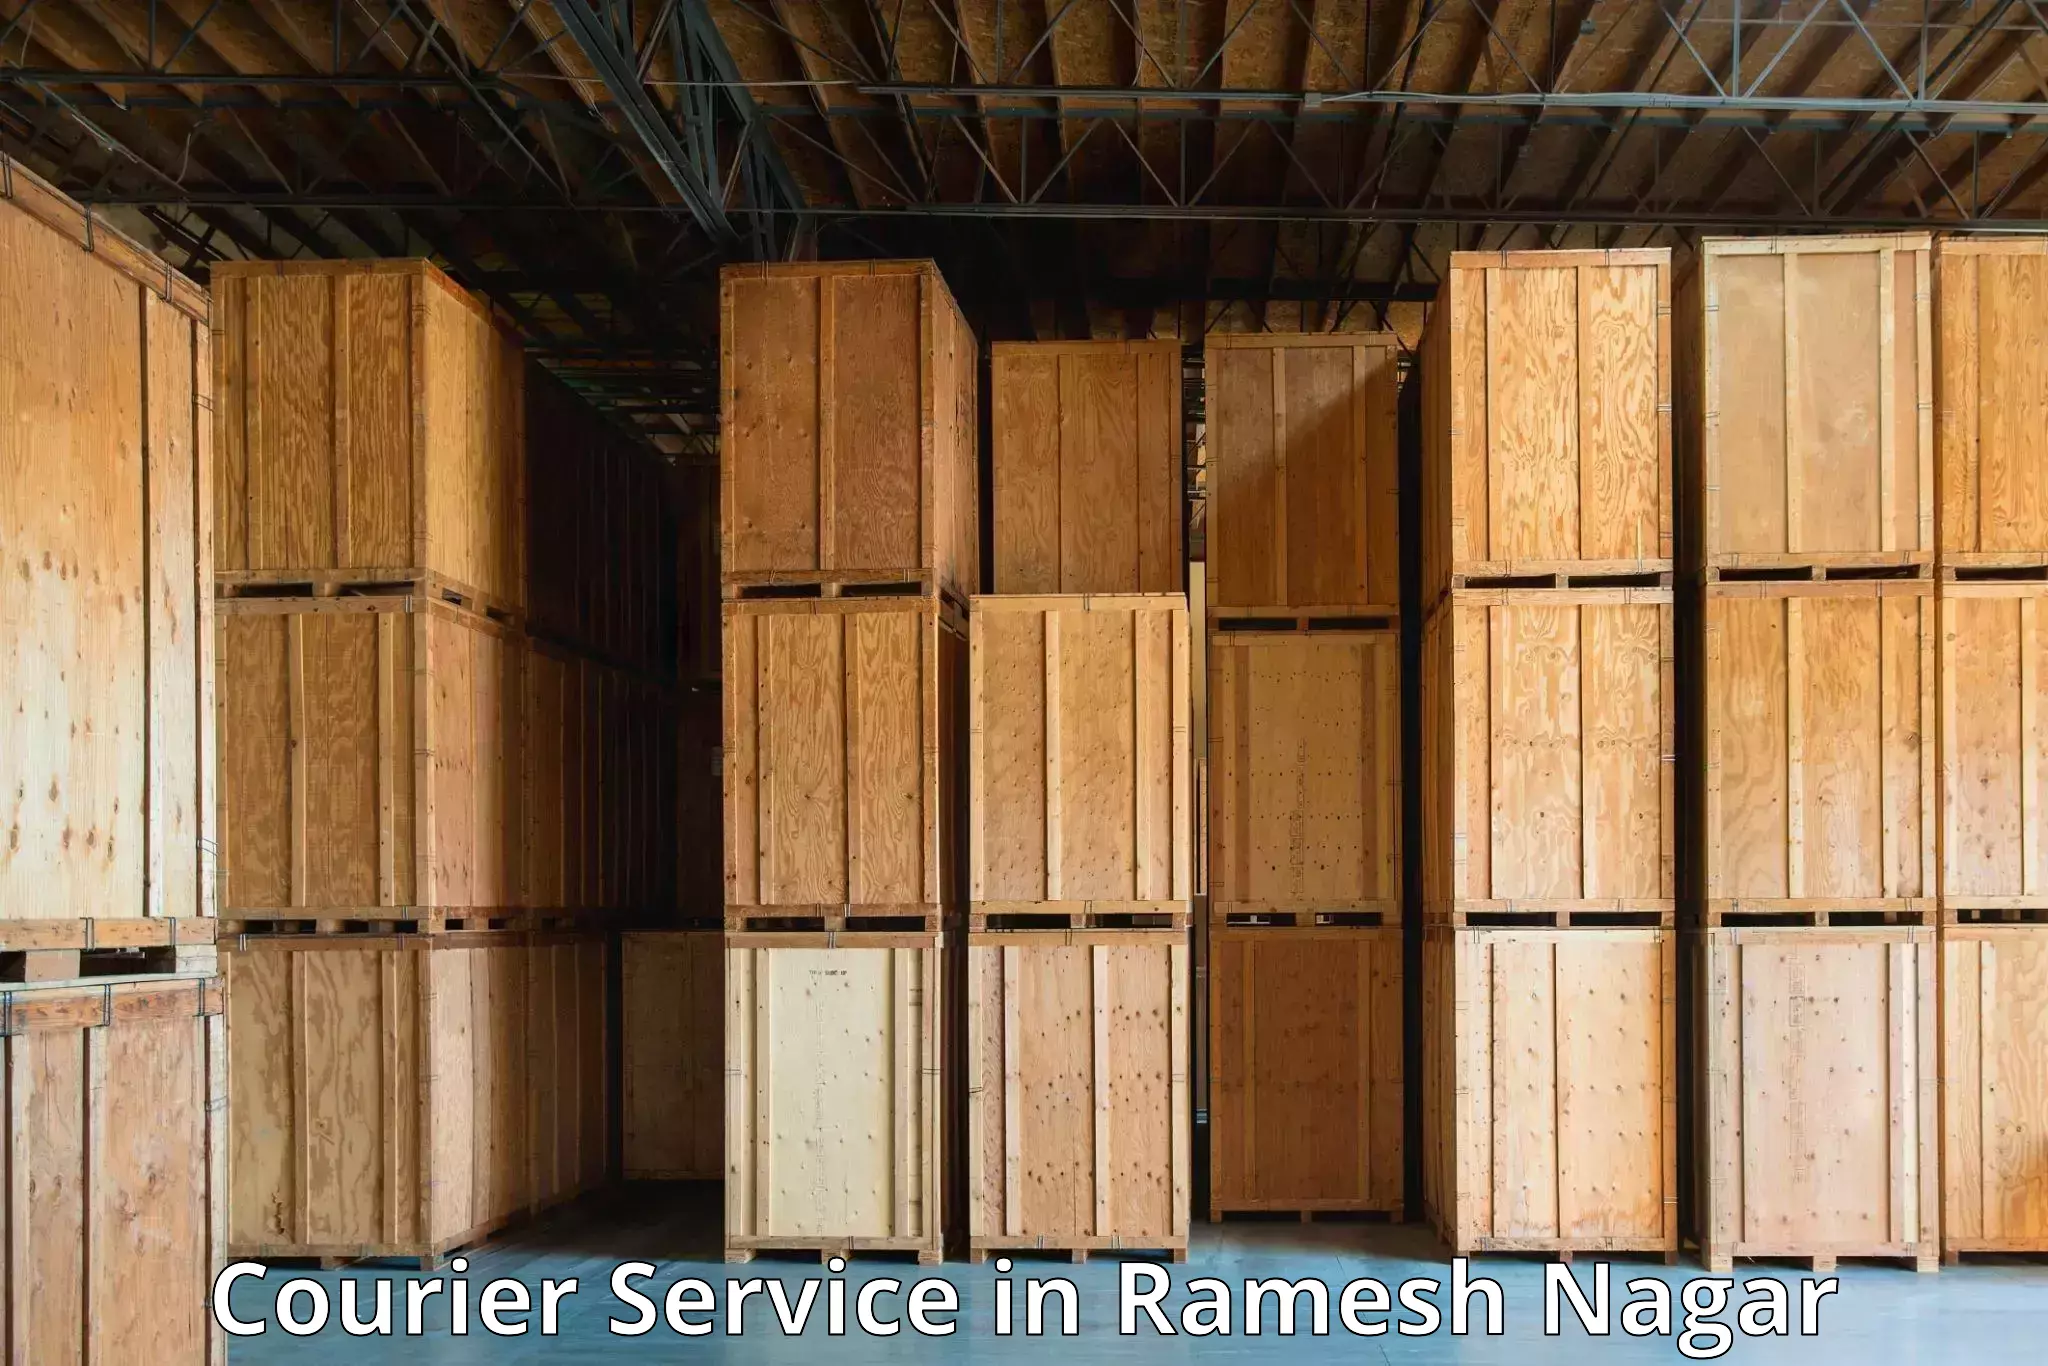 Automated shipping processes in Ramesh Nagar